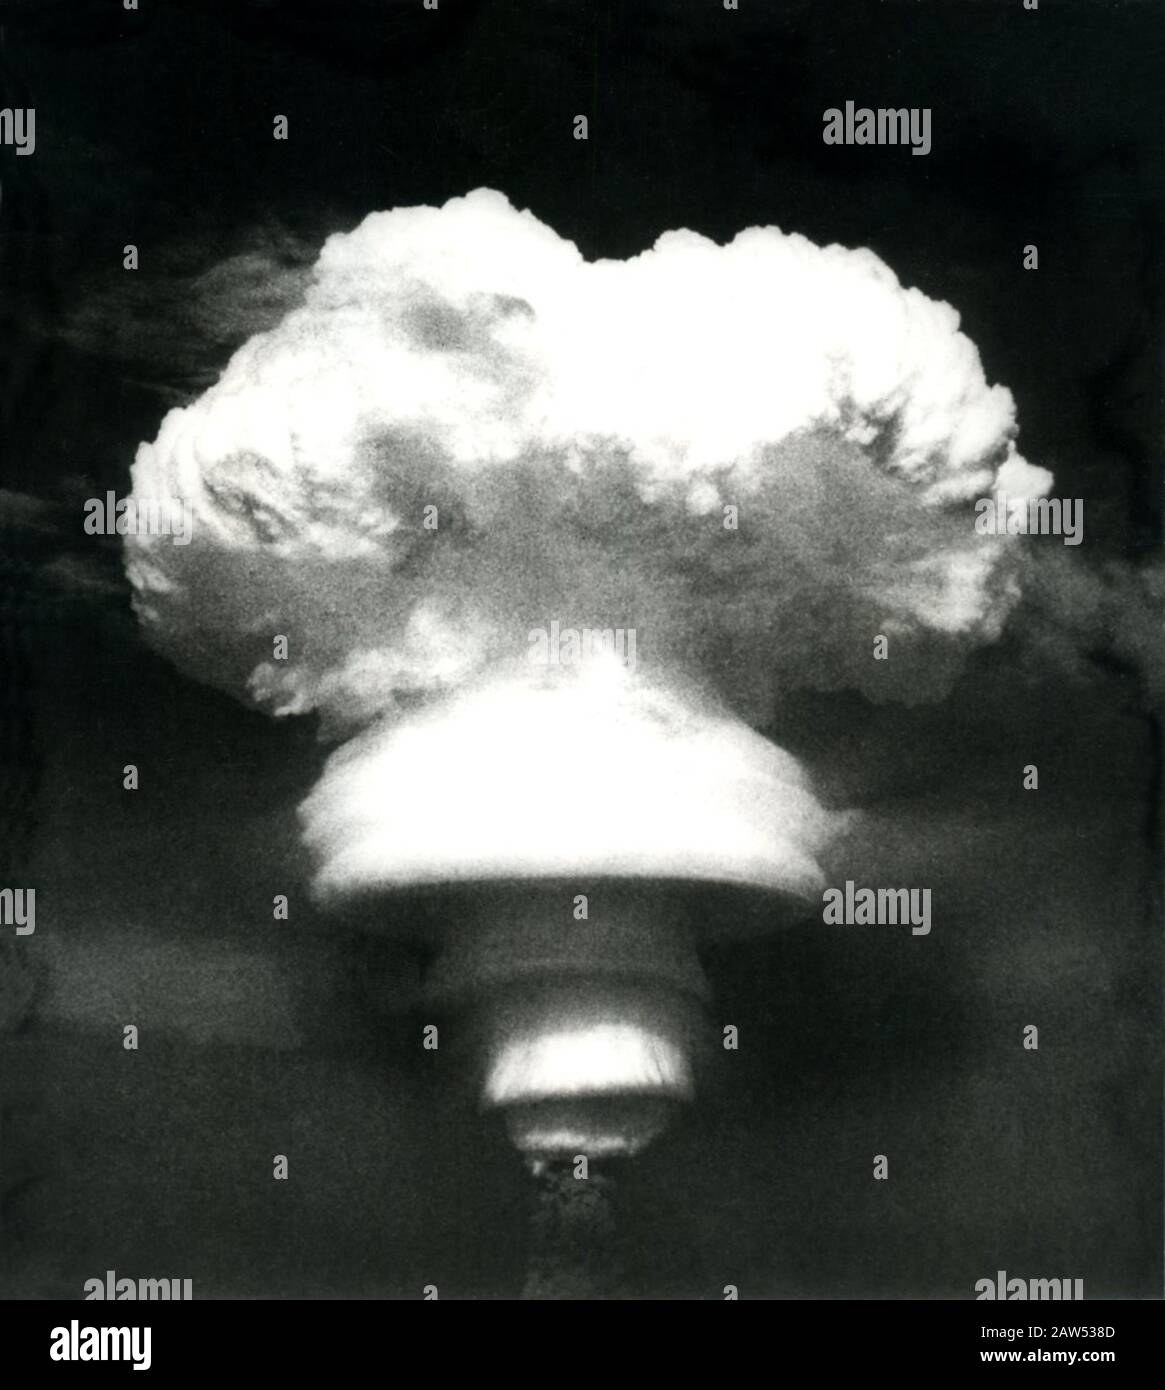 1967 CA, CHINA: Chinish NUCLEAR TEST - ATTACCO ATOMICO NUCLEARE ENERGIA - ENERGIE - ATOMANGRIFF - BOMBA ATOMICA - Foto Storiche storica - HISTOR Stockfoto